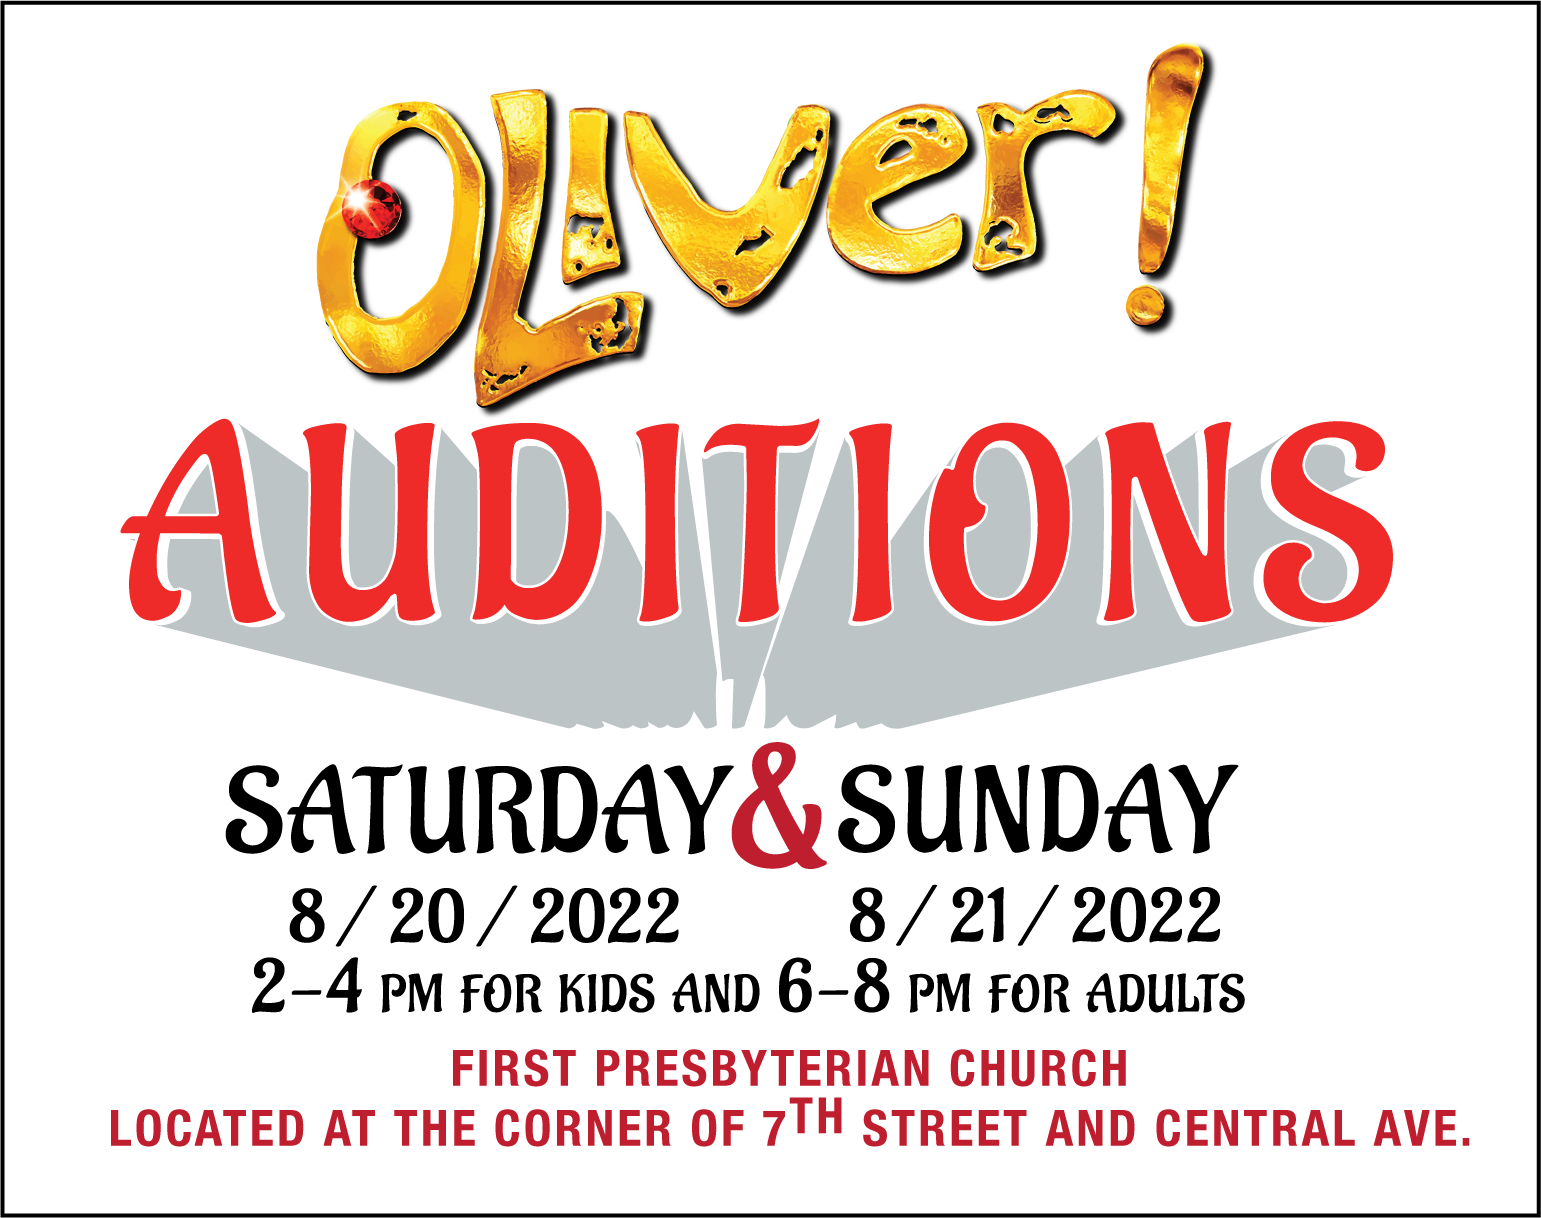 Oliver Web Auditions